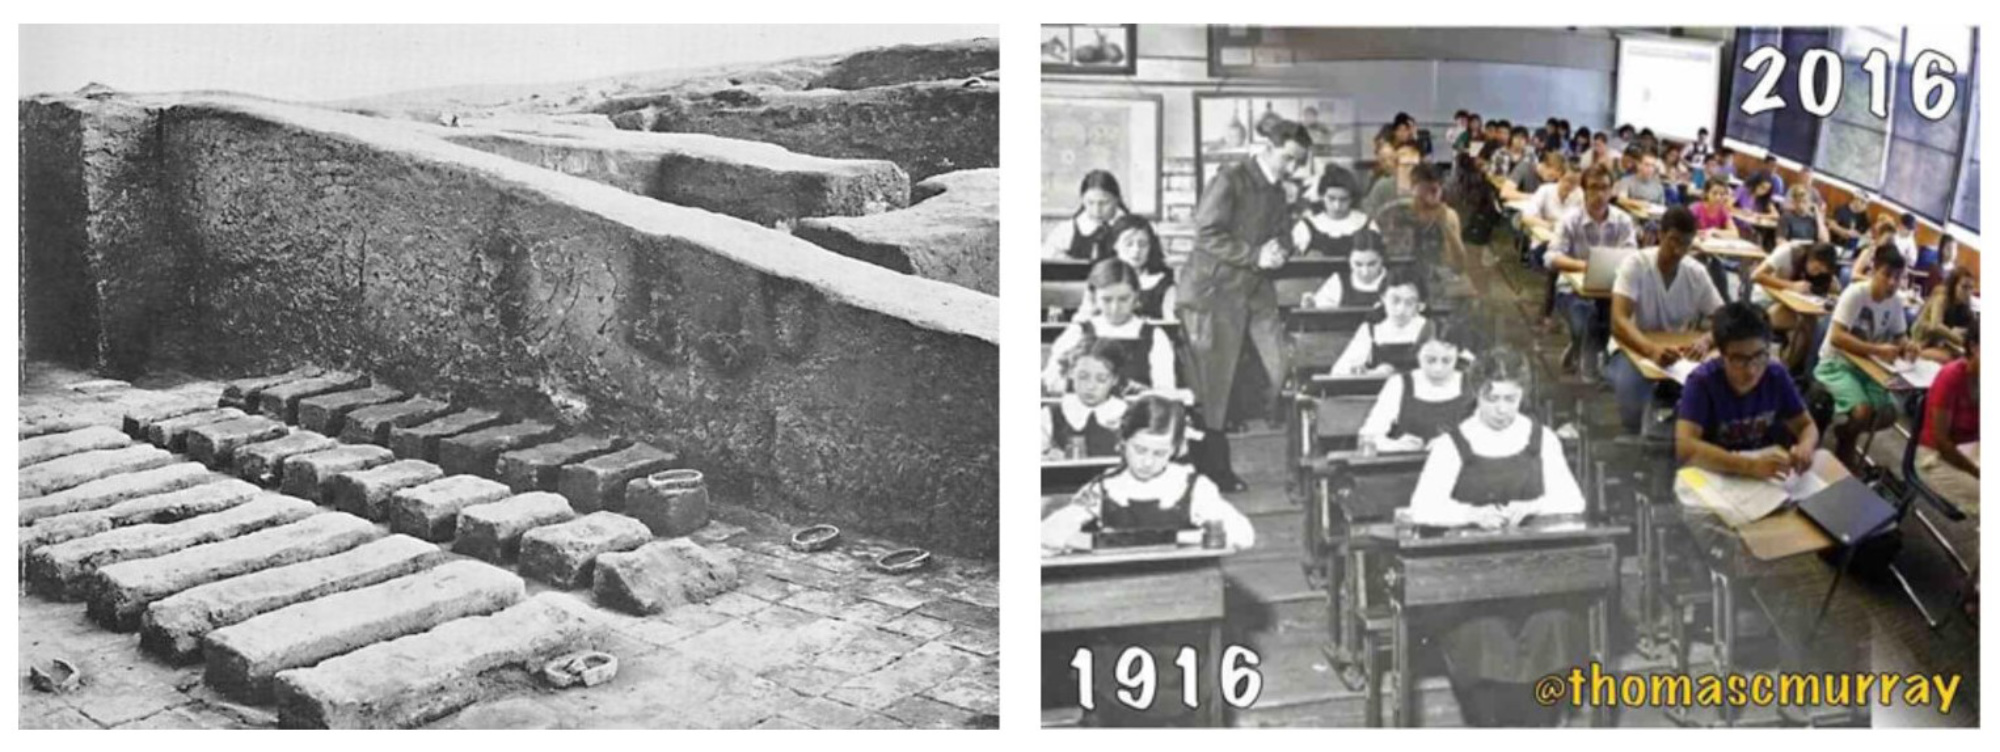 Images of ancient Sumerian classrooms from an archaelogical excavation, and classrooms from the early 20th and 21st century.